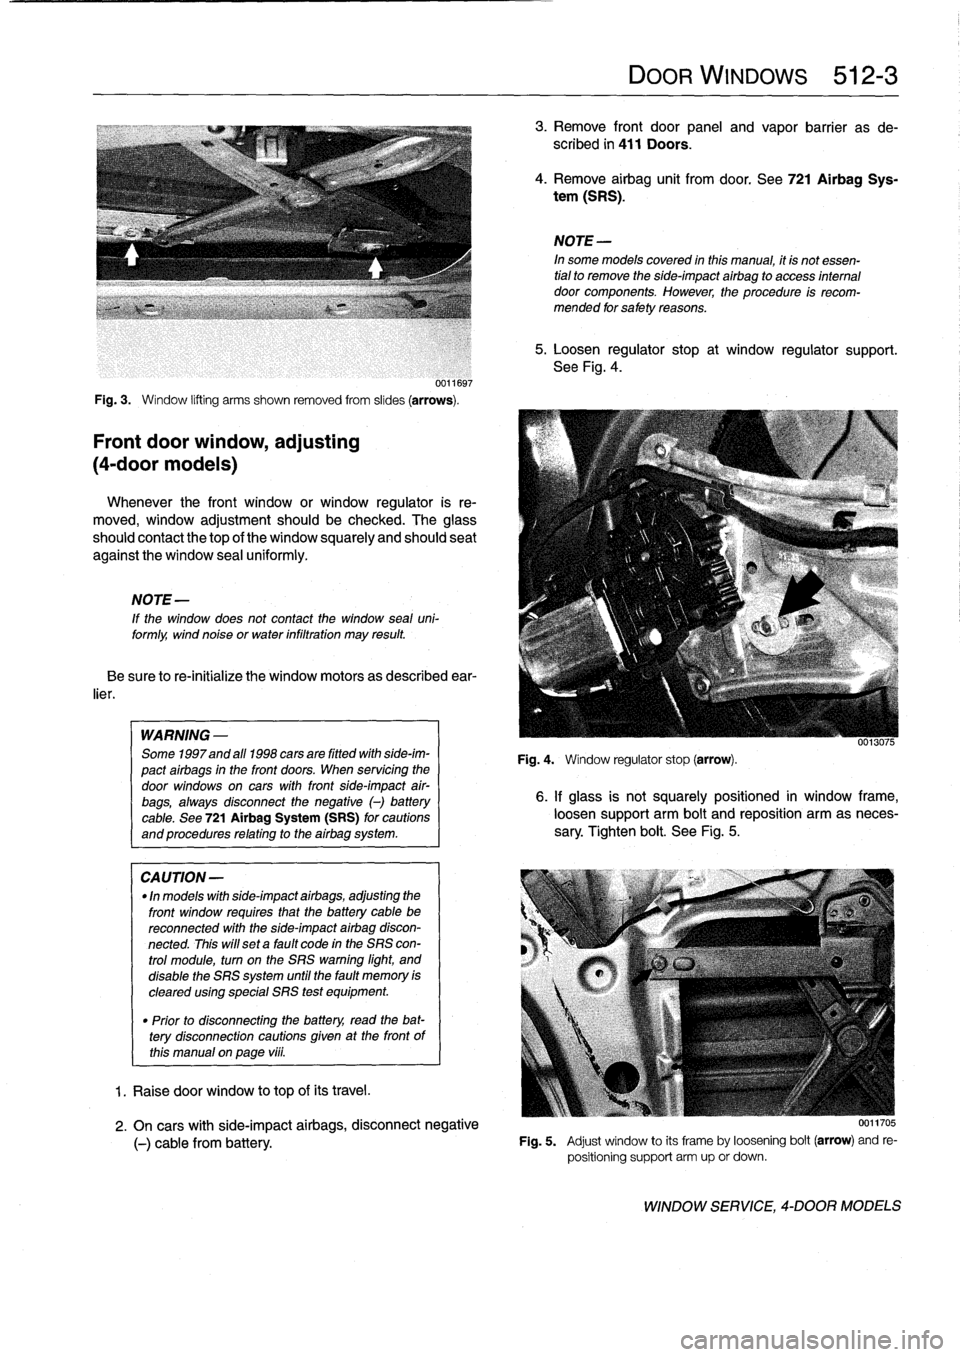 BMW 318i 1997 E36 Workshop Manual 
0011697

Fig
.
3
.

	

Window
lifting
arms
shown
removed
from
slides
(arrows)
.

Front
door
window,
adjusting

(4-door
models)

Whenever
the
front
window
or
window
regulator
is
re-

moved,
window
adj